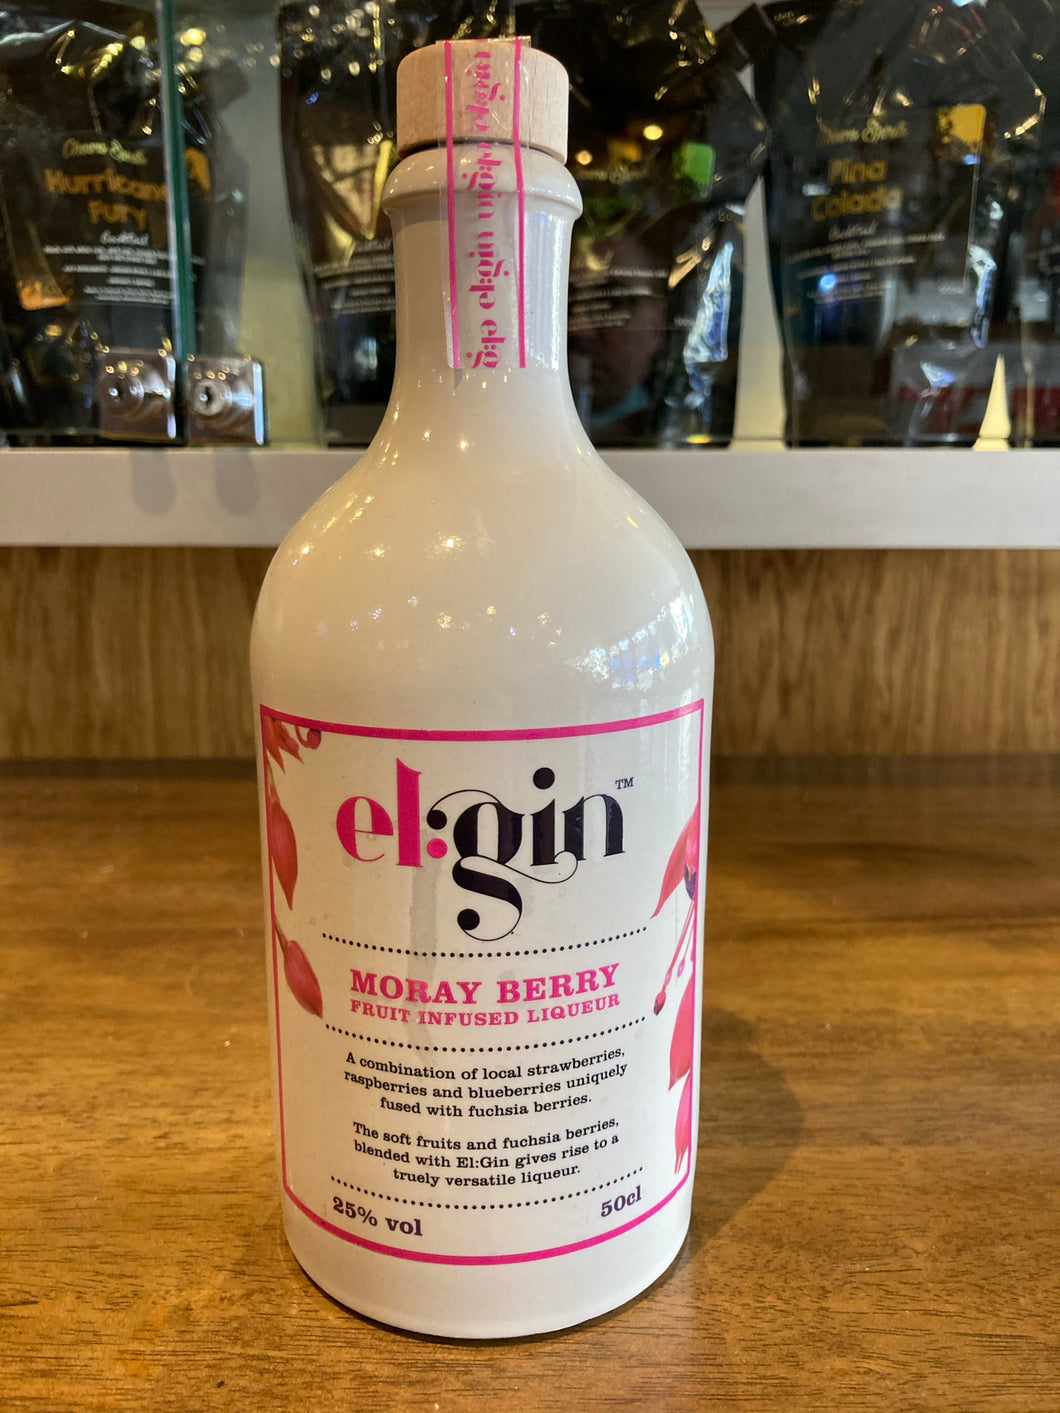 El:Gin Moray Berry Fruit Infused Liqueur, 25.0% abv